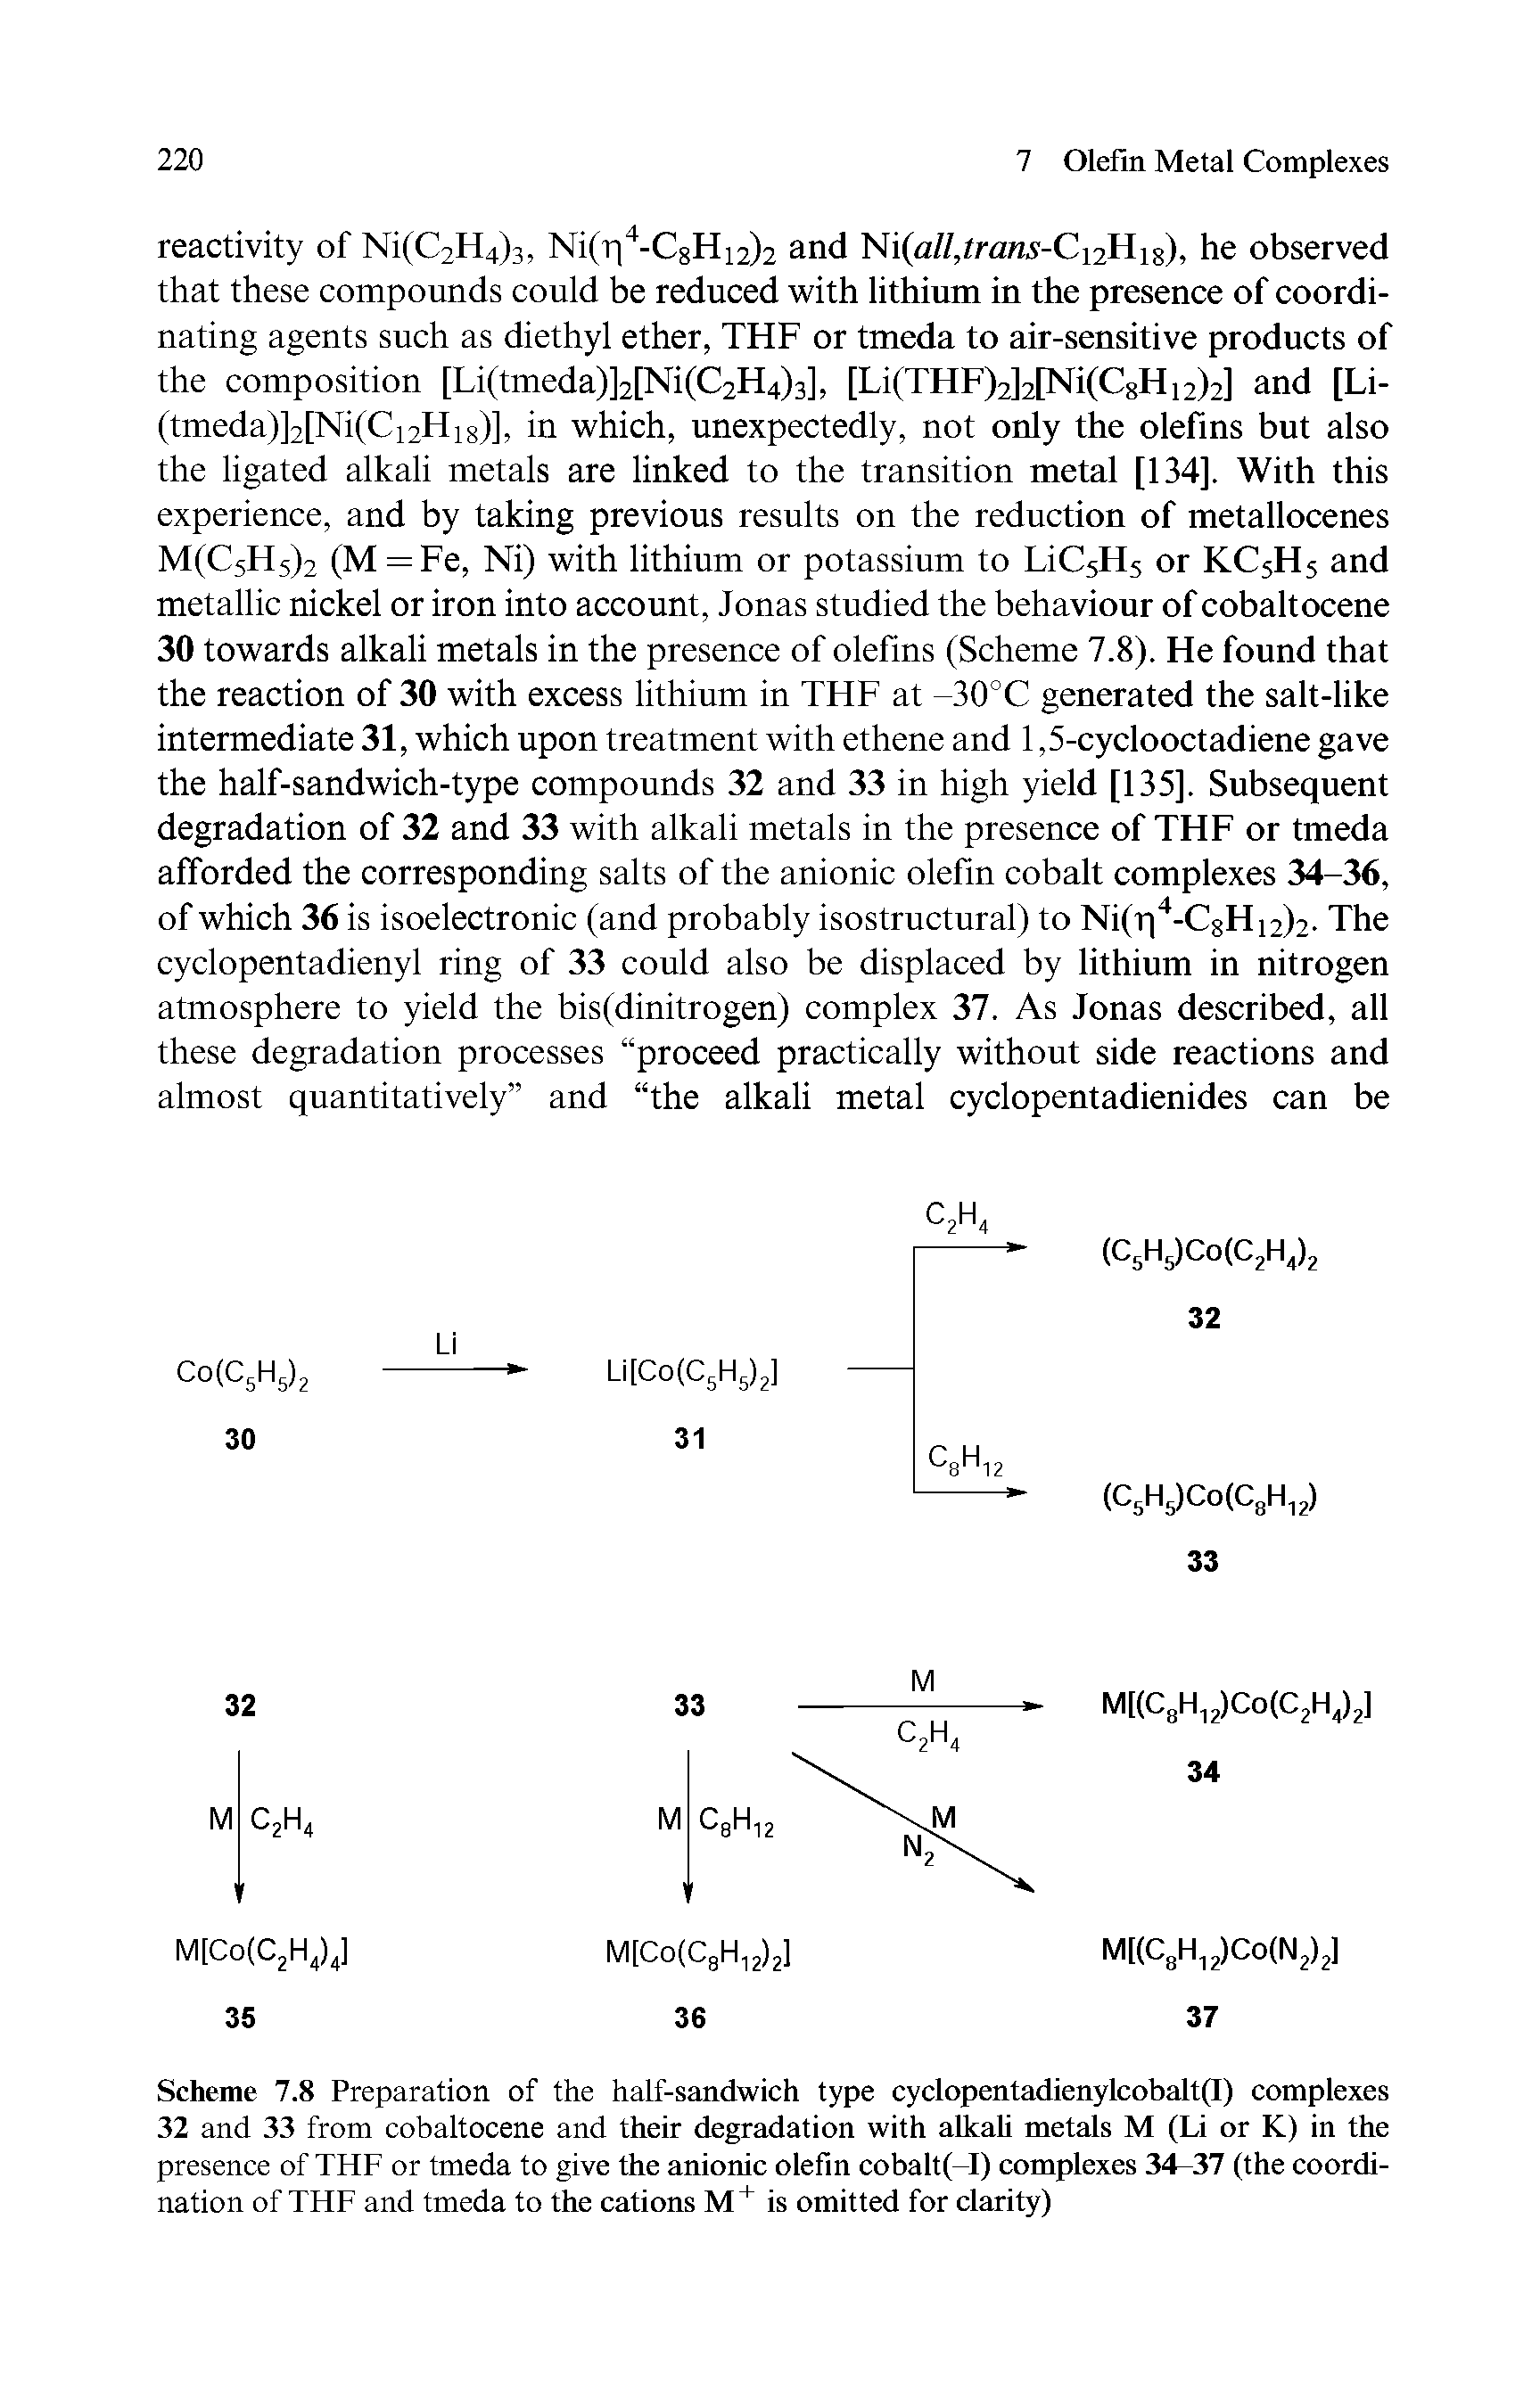 Scheme 7.8 Preparation of the half-sandwich type cyclopentadienylcobalt(I) complexes 32 and 33 from cobaltocene and their degradation with alkali metals M (Li or K) in the presence of THF or tmeda to give the anionic olefin cobalt(-I) complexes 34-37 (the coordination of THF and tmeda to the cations M+ is omitted for clarity)...